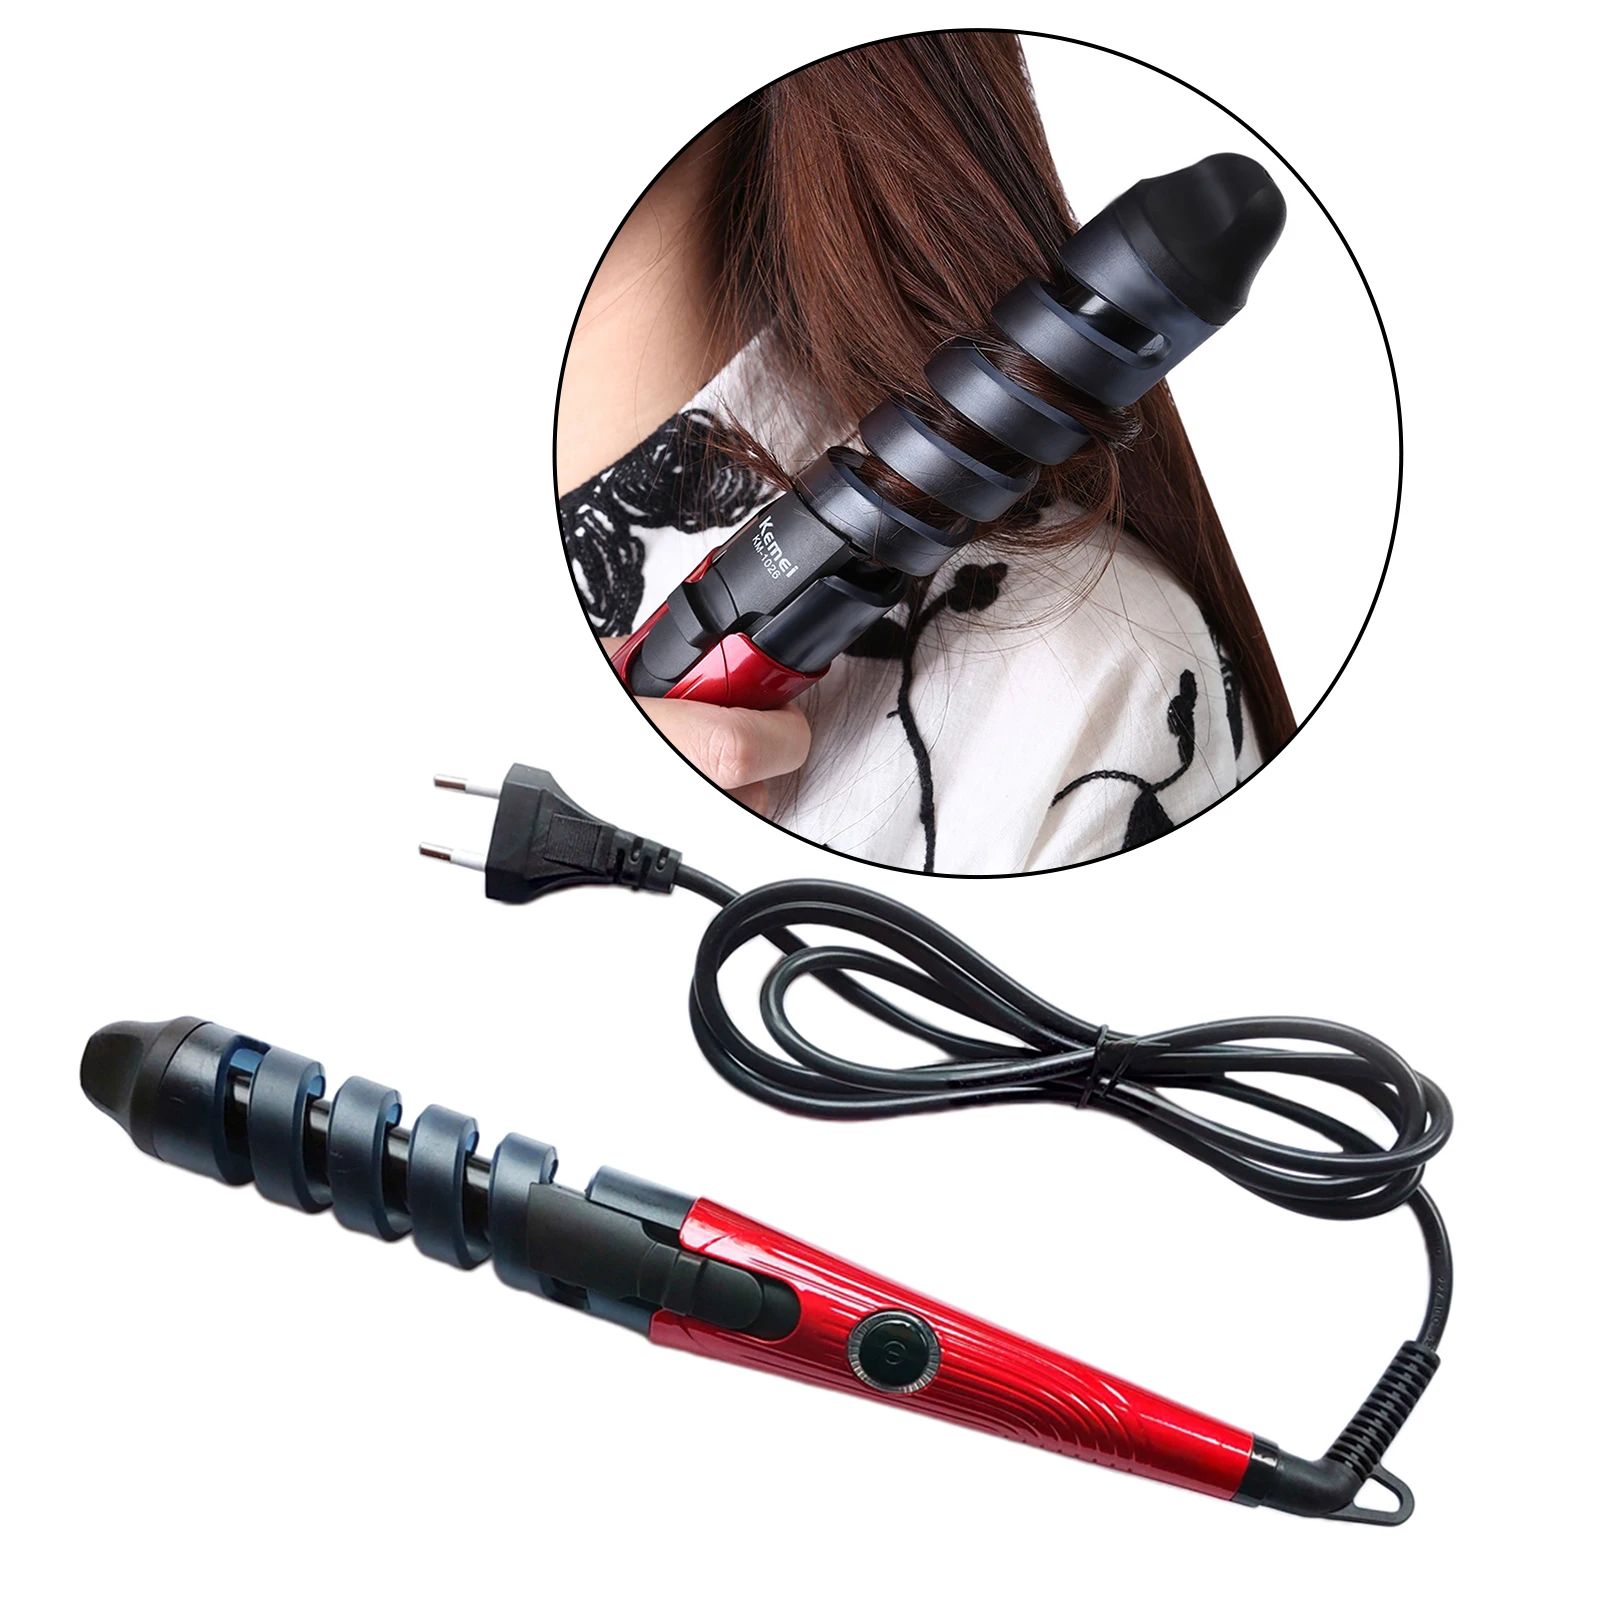 Pro Heating Hairdressing Hair Curlers Curling Wand Rod for All Hair Types Adjustable Temperature Spiral Hair Curling Iron